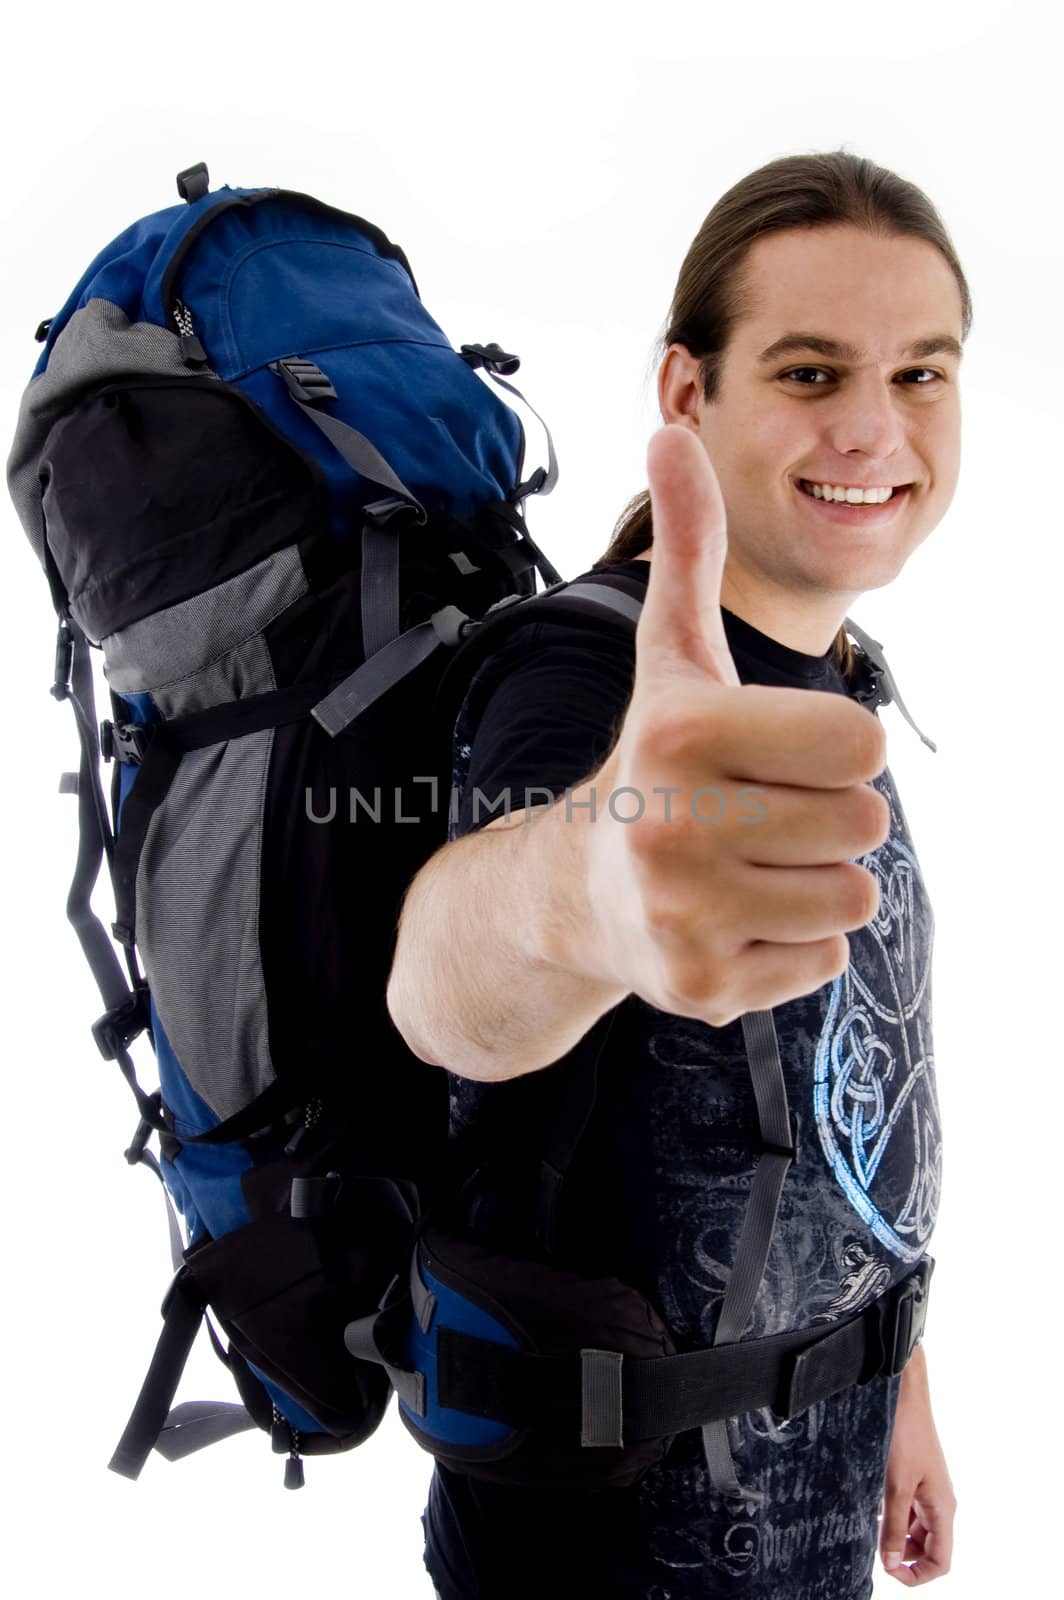 happy traveler showing thumbs up on an isolated background